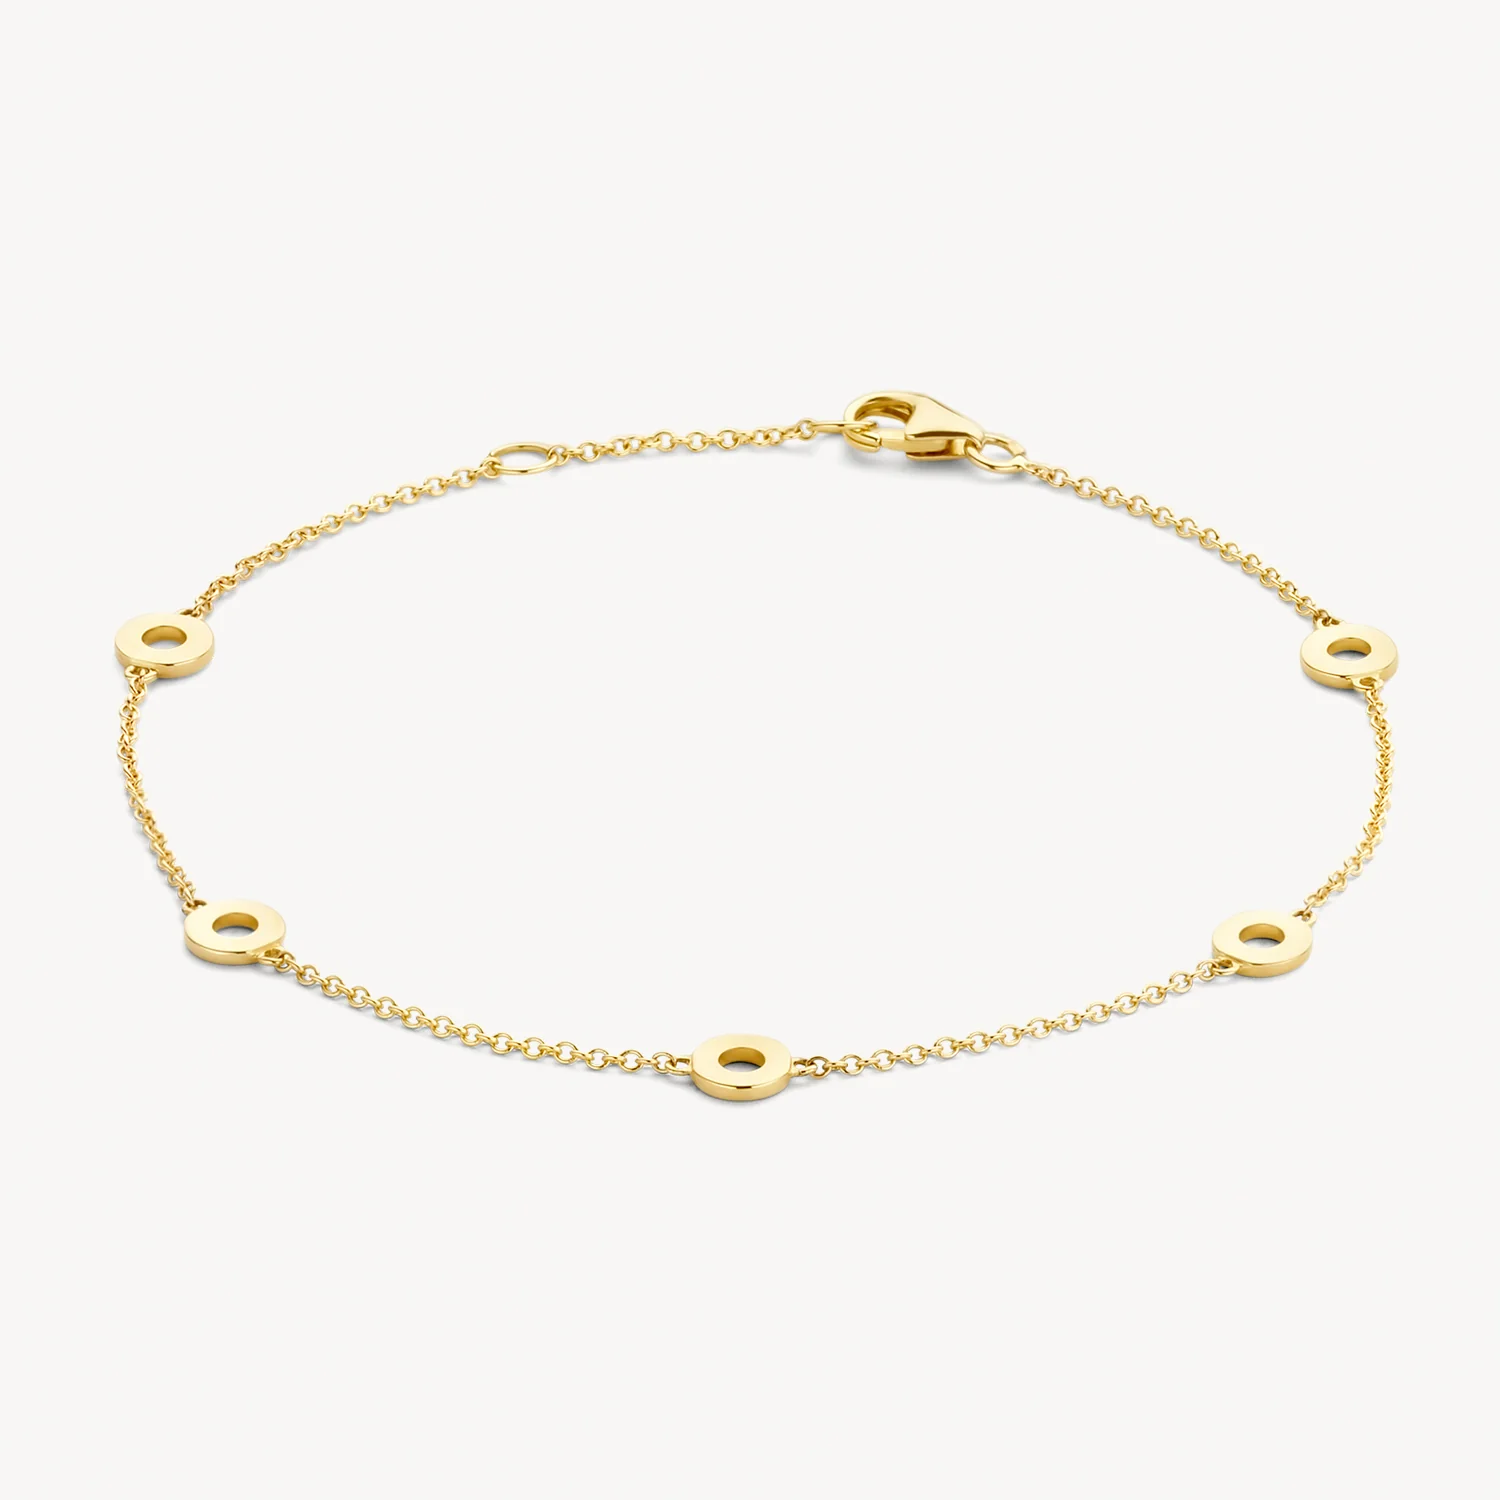 Blush Yellow Gold Chain Bracelet with Open Dots